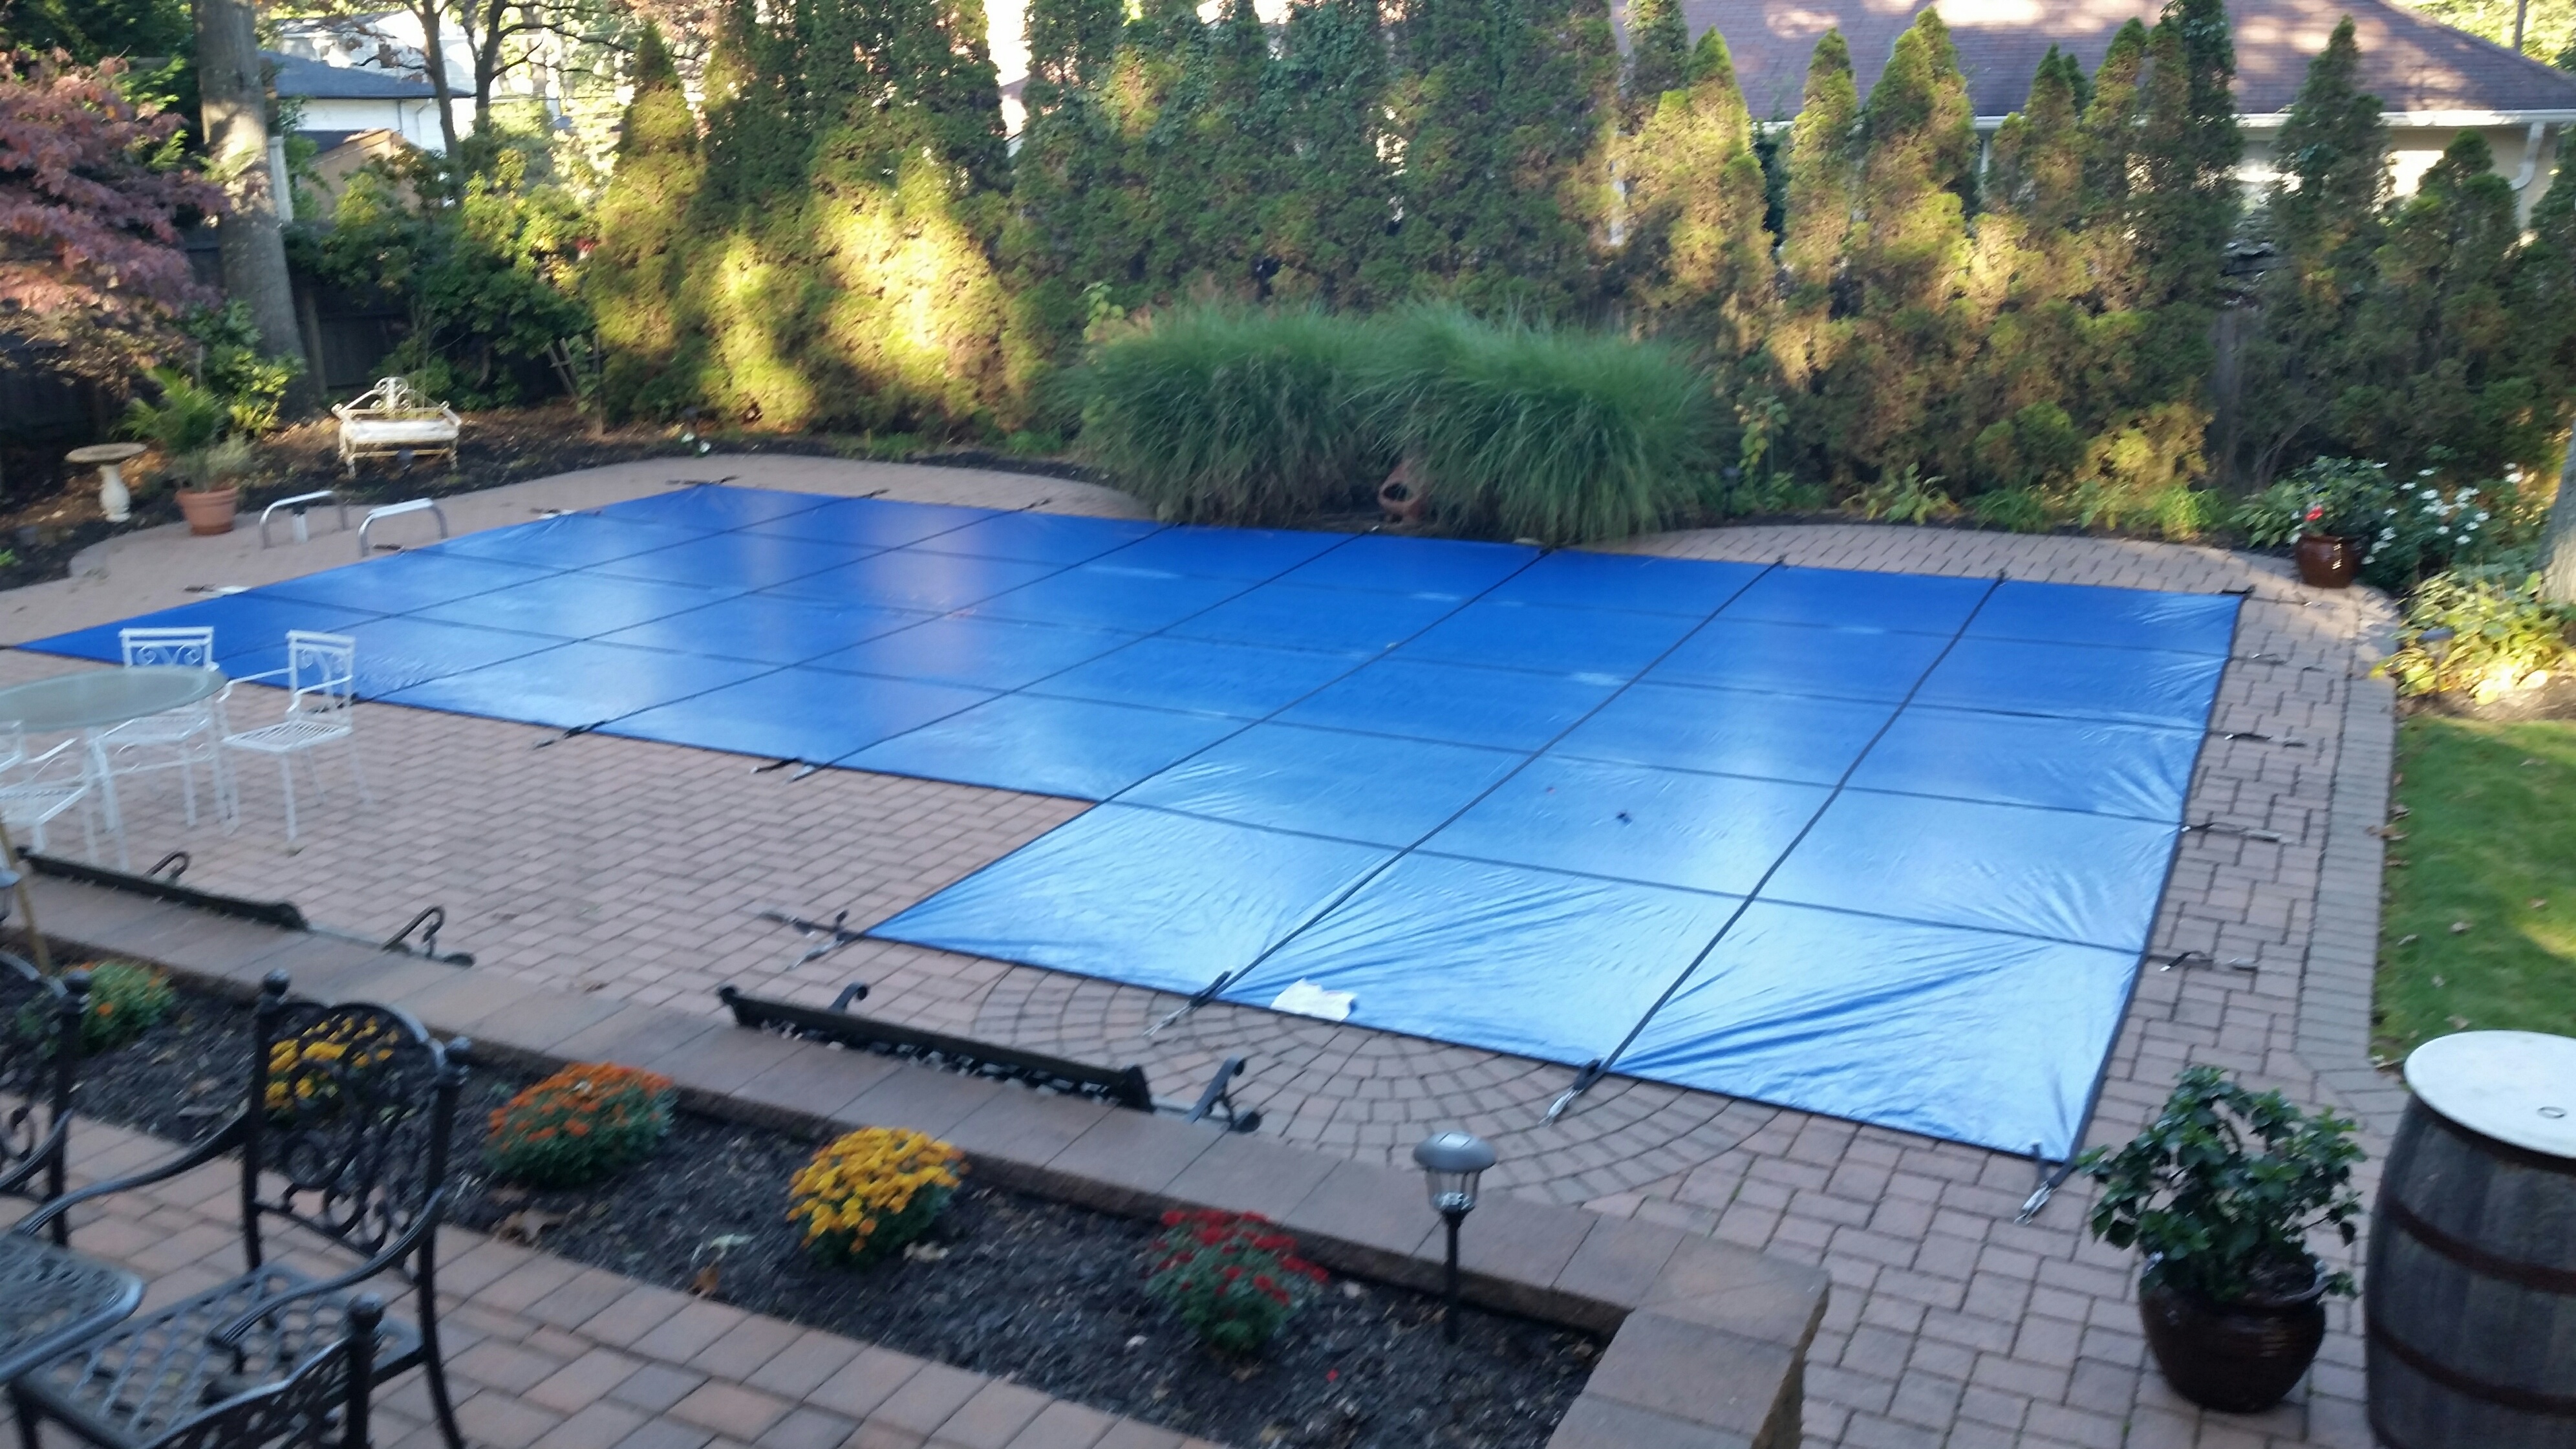 The best safety covers for swimming pools come from Royal Swimming Pools